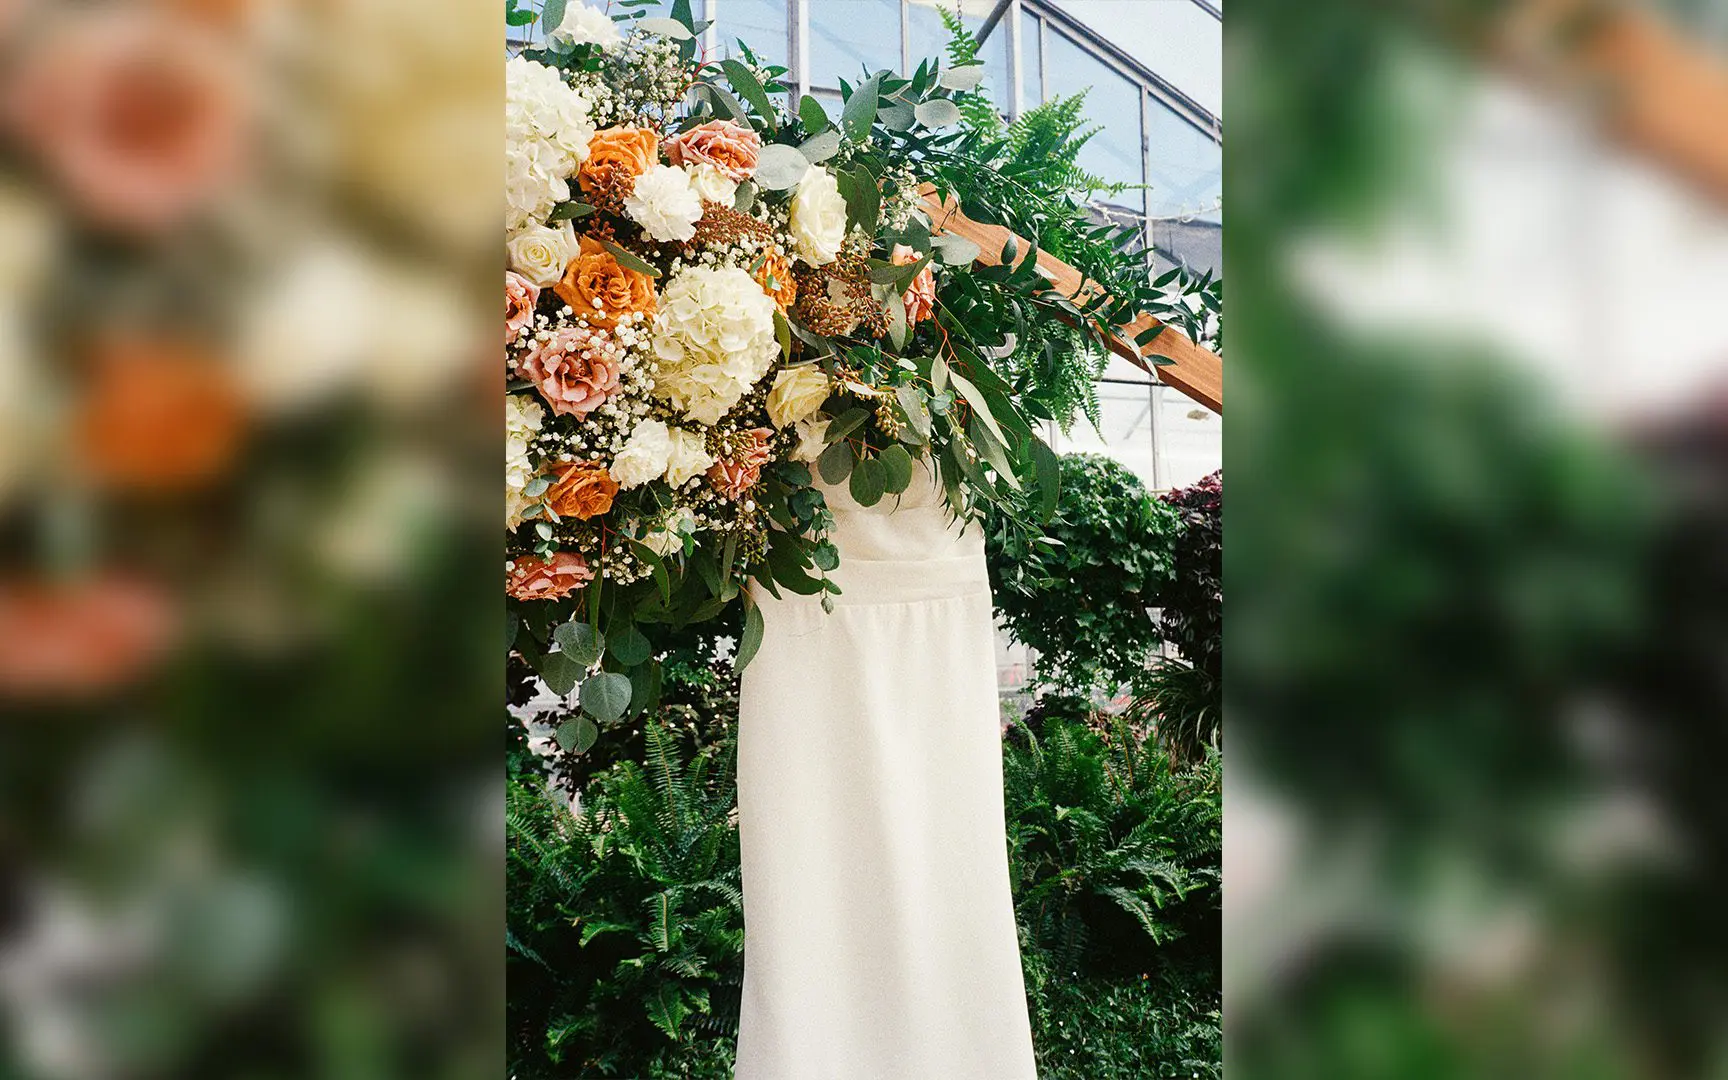 A wedding dress mannequin surrounded by vibrant floral arrangements in a greenhouse setting.